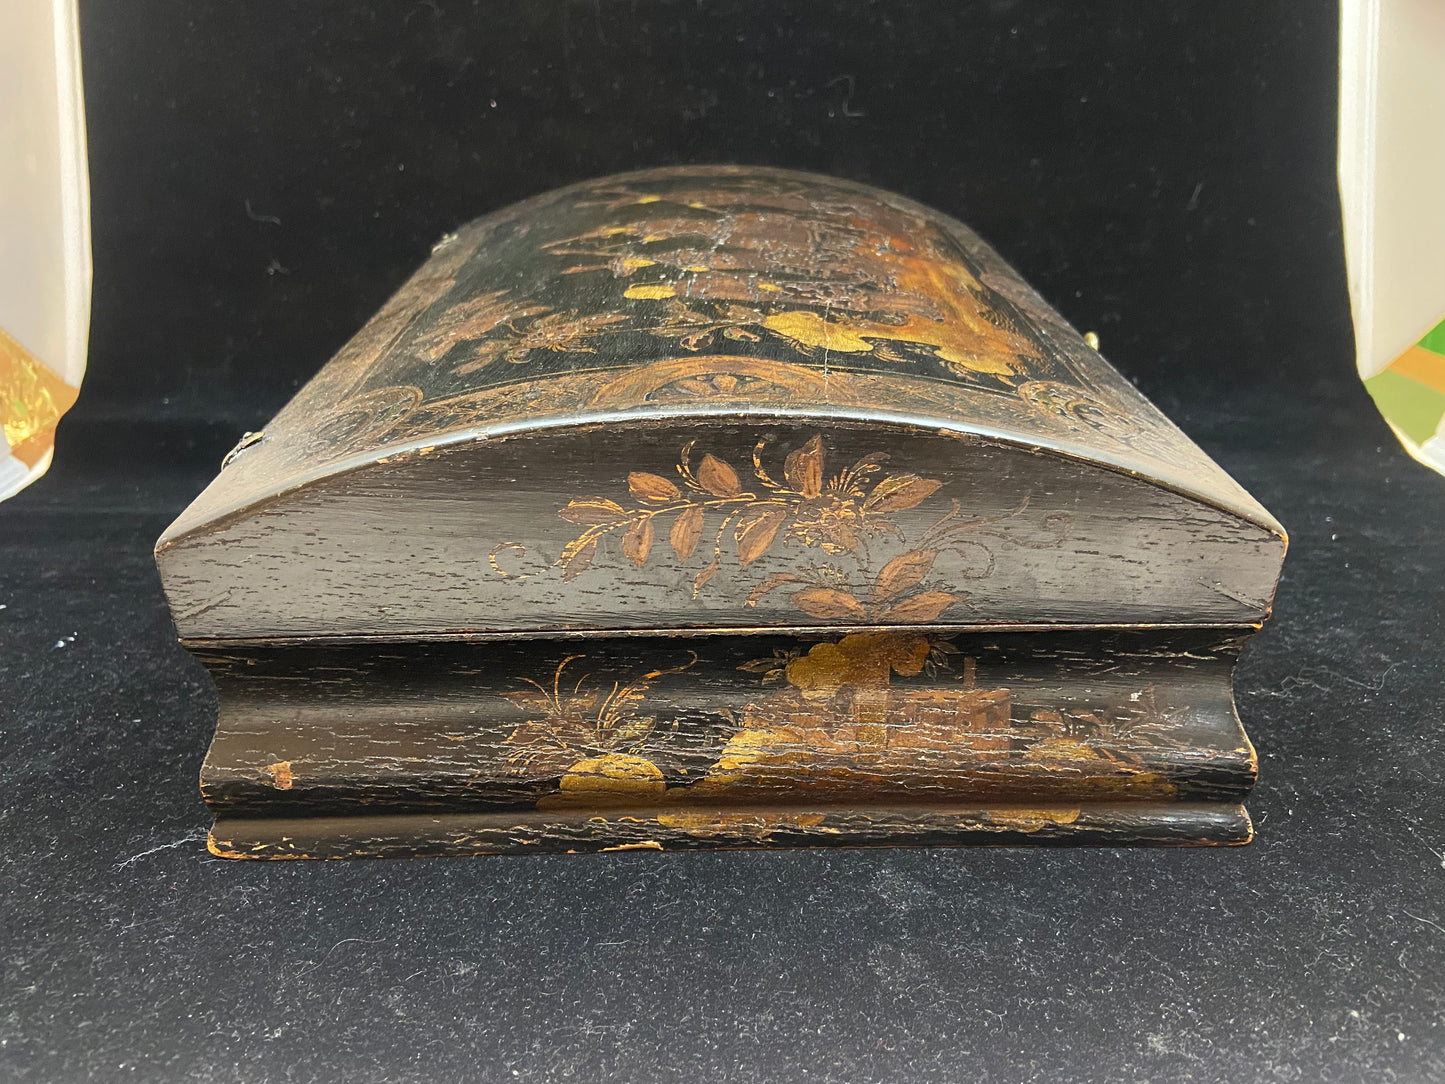 Antique Chinese Lacquered Box (25077)